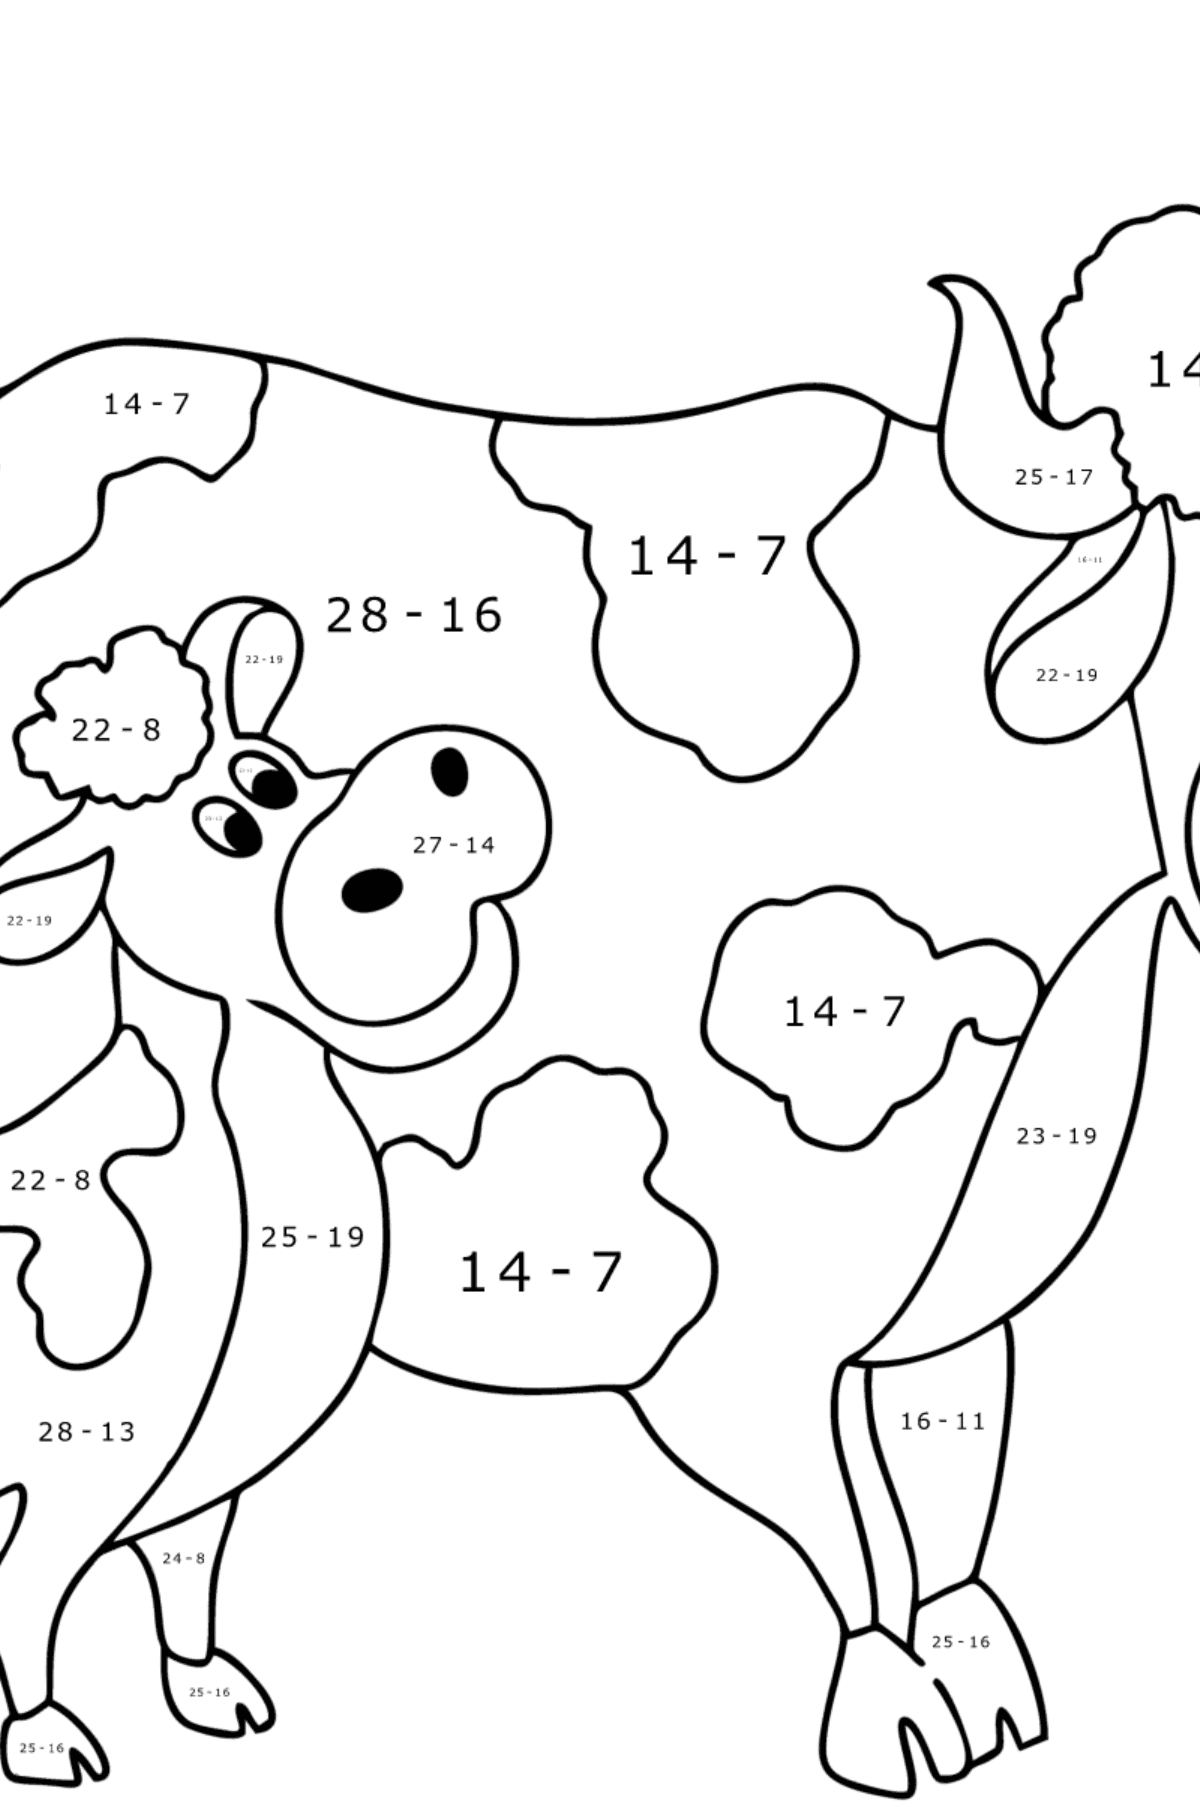 Cow and calf coloring pages - Math Coloring - Subtraction for Kids